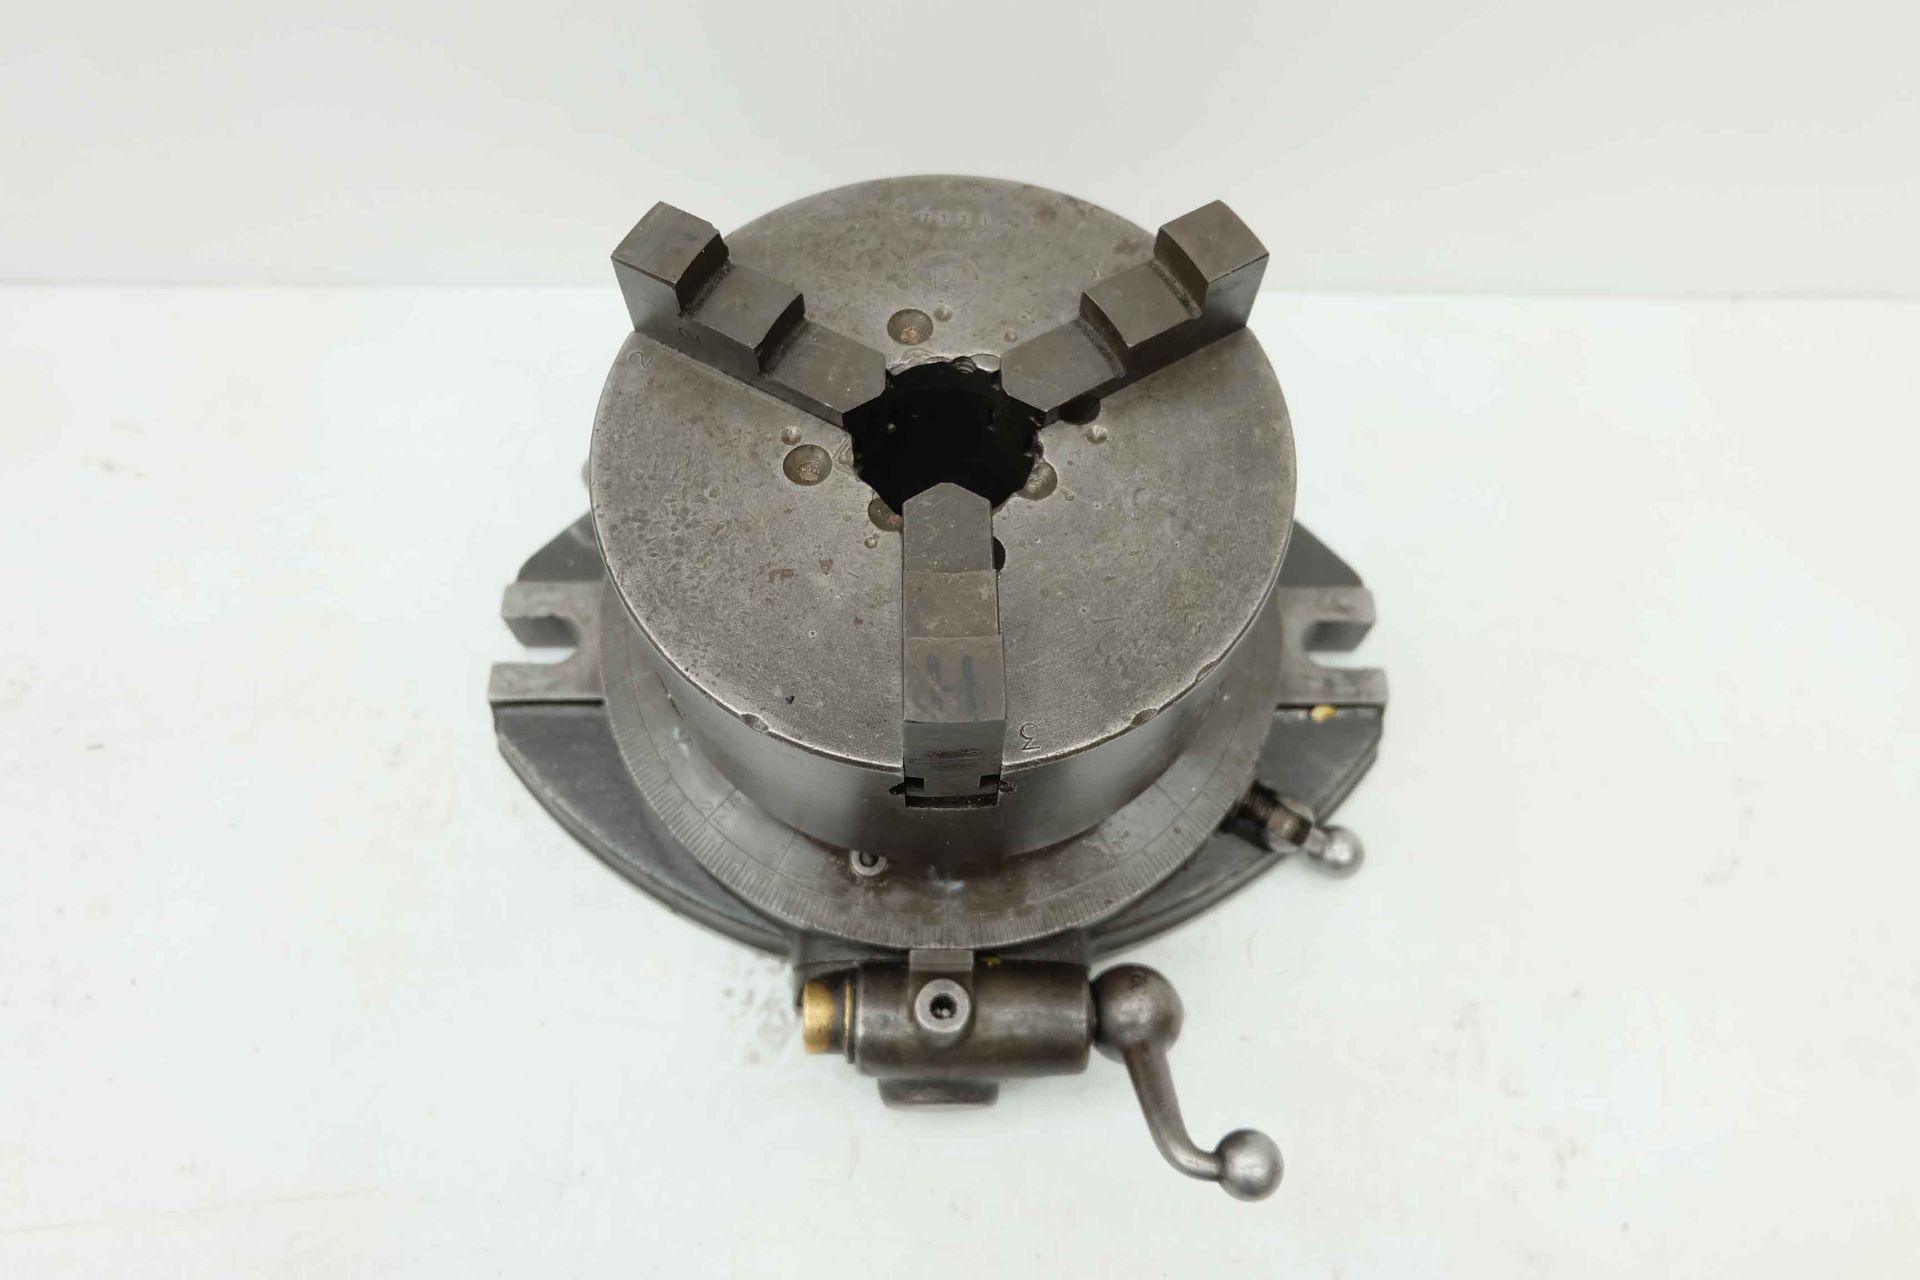 Indexing Fixture With 24 Posistions. With 6" Three Jaw Chuck - Image 3 of 4